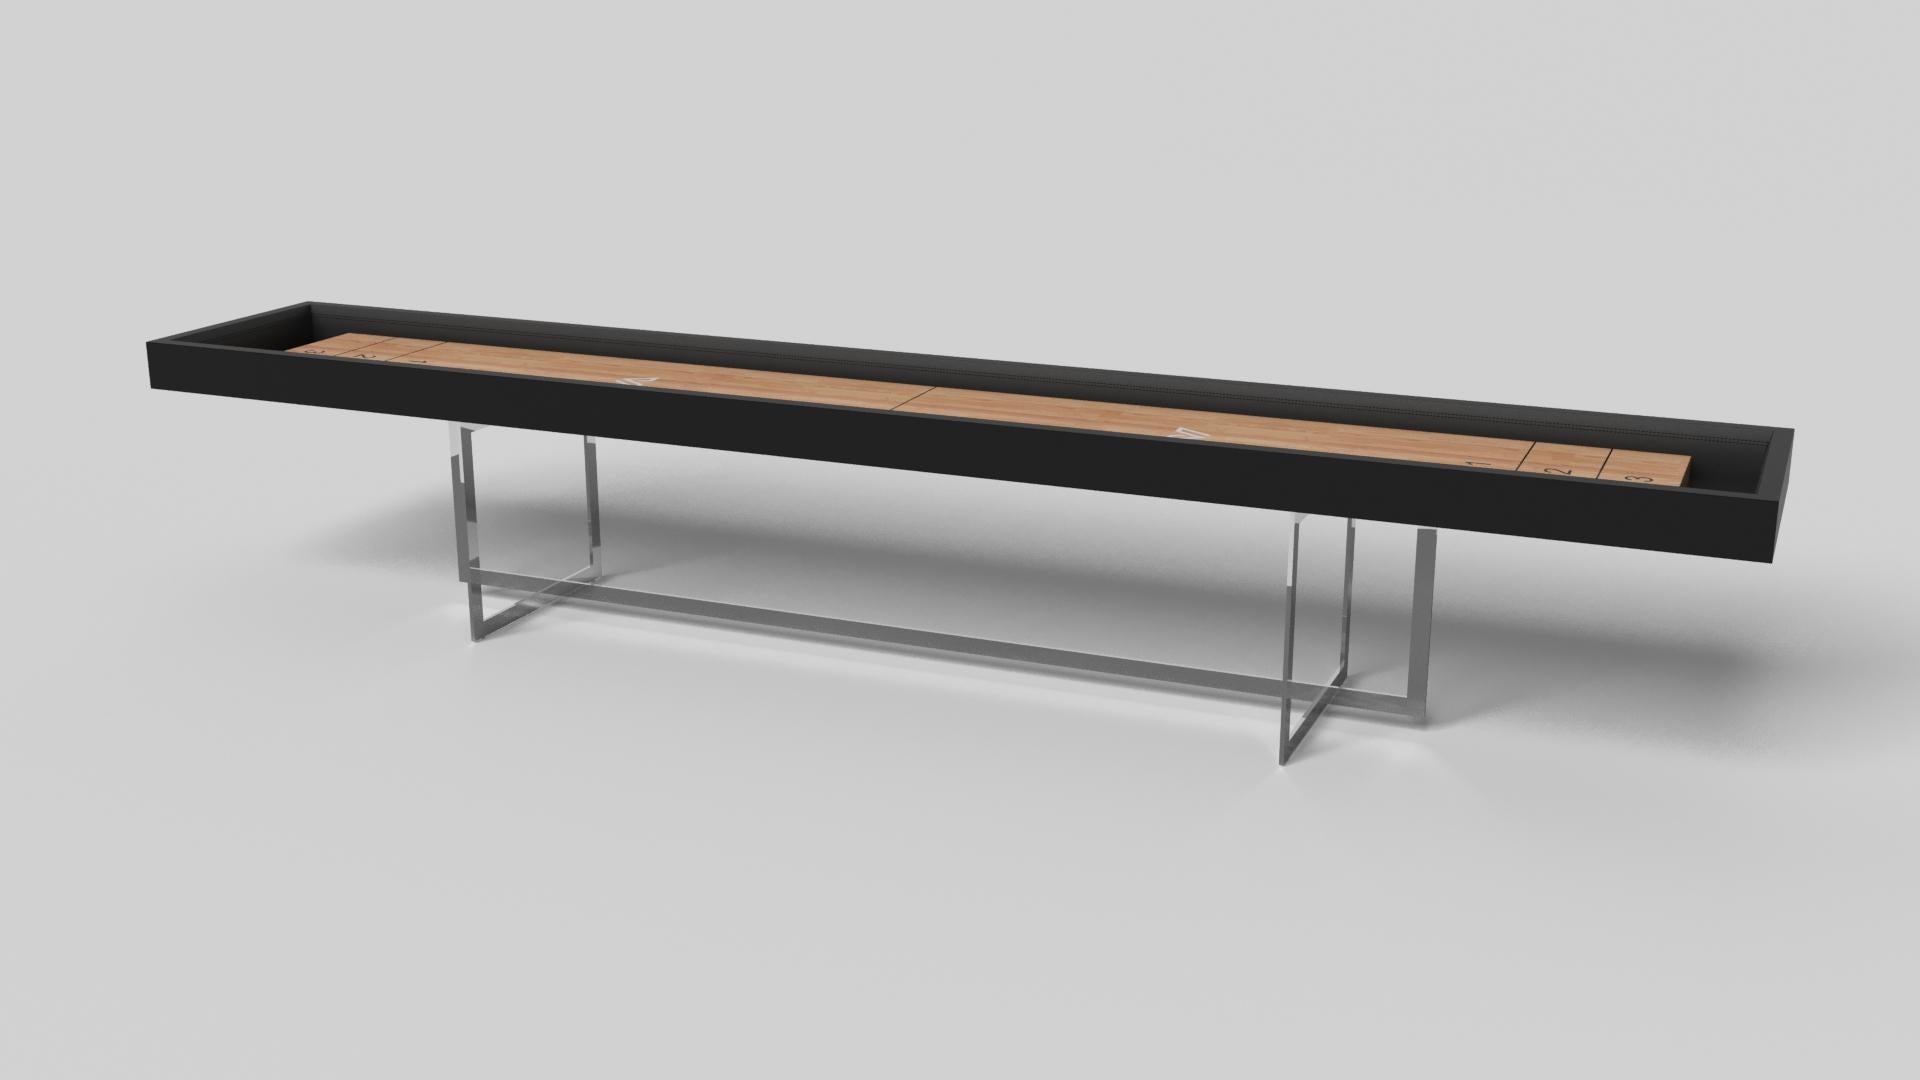 Handcrafted with clean lines, sharp angles, and a pyramid base, the Vogue shuffleboard table in chrome with black strikes the perfect balance between sport-inspired style and contemporary design. Timeless in its appeal and revered for its